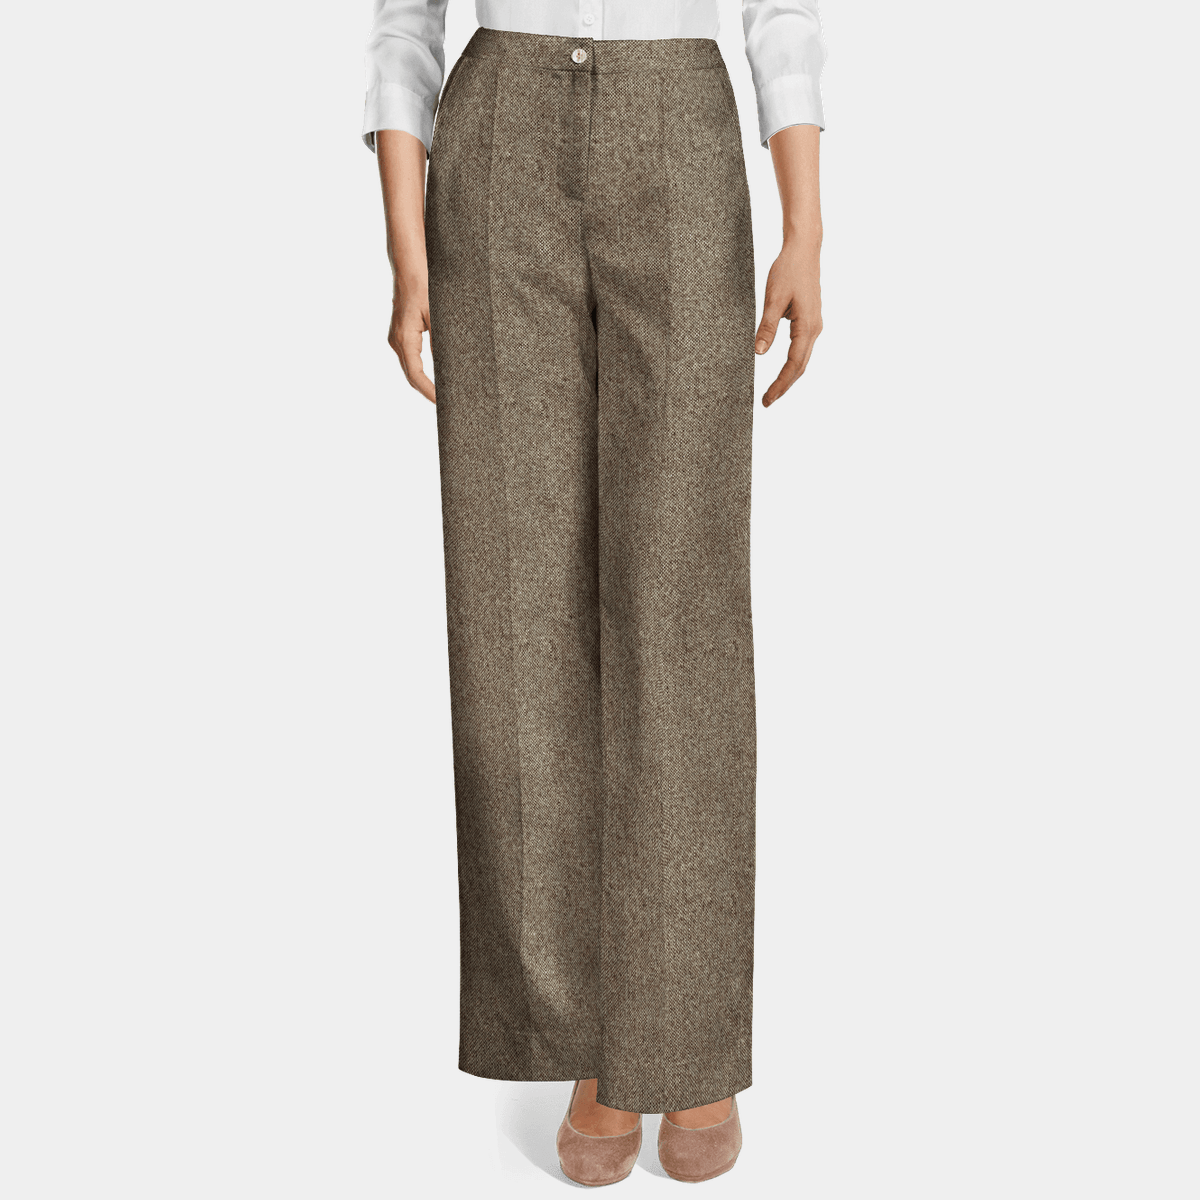 Sister Jane - Tweed Stirrup Trousers - Ethical Women's Apparel – Curate